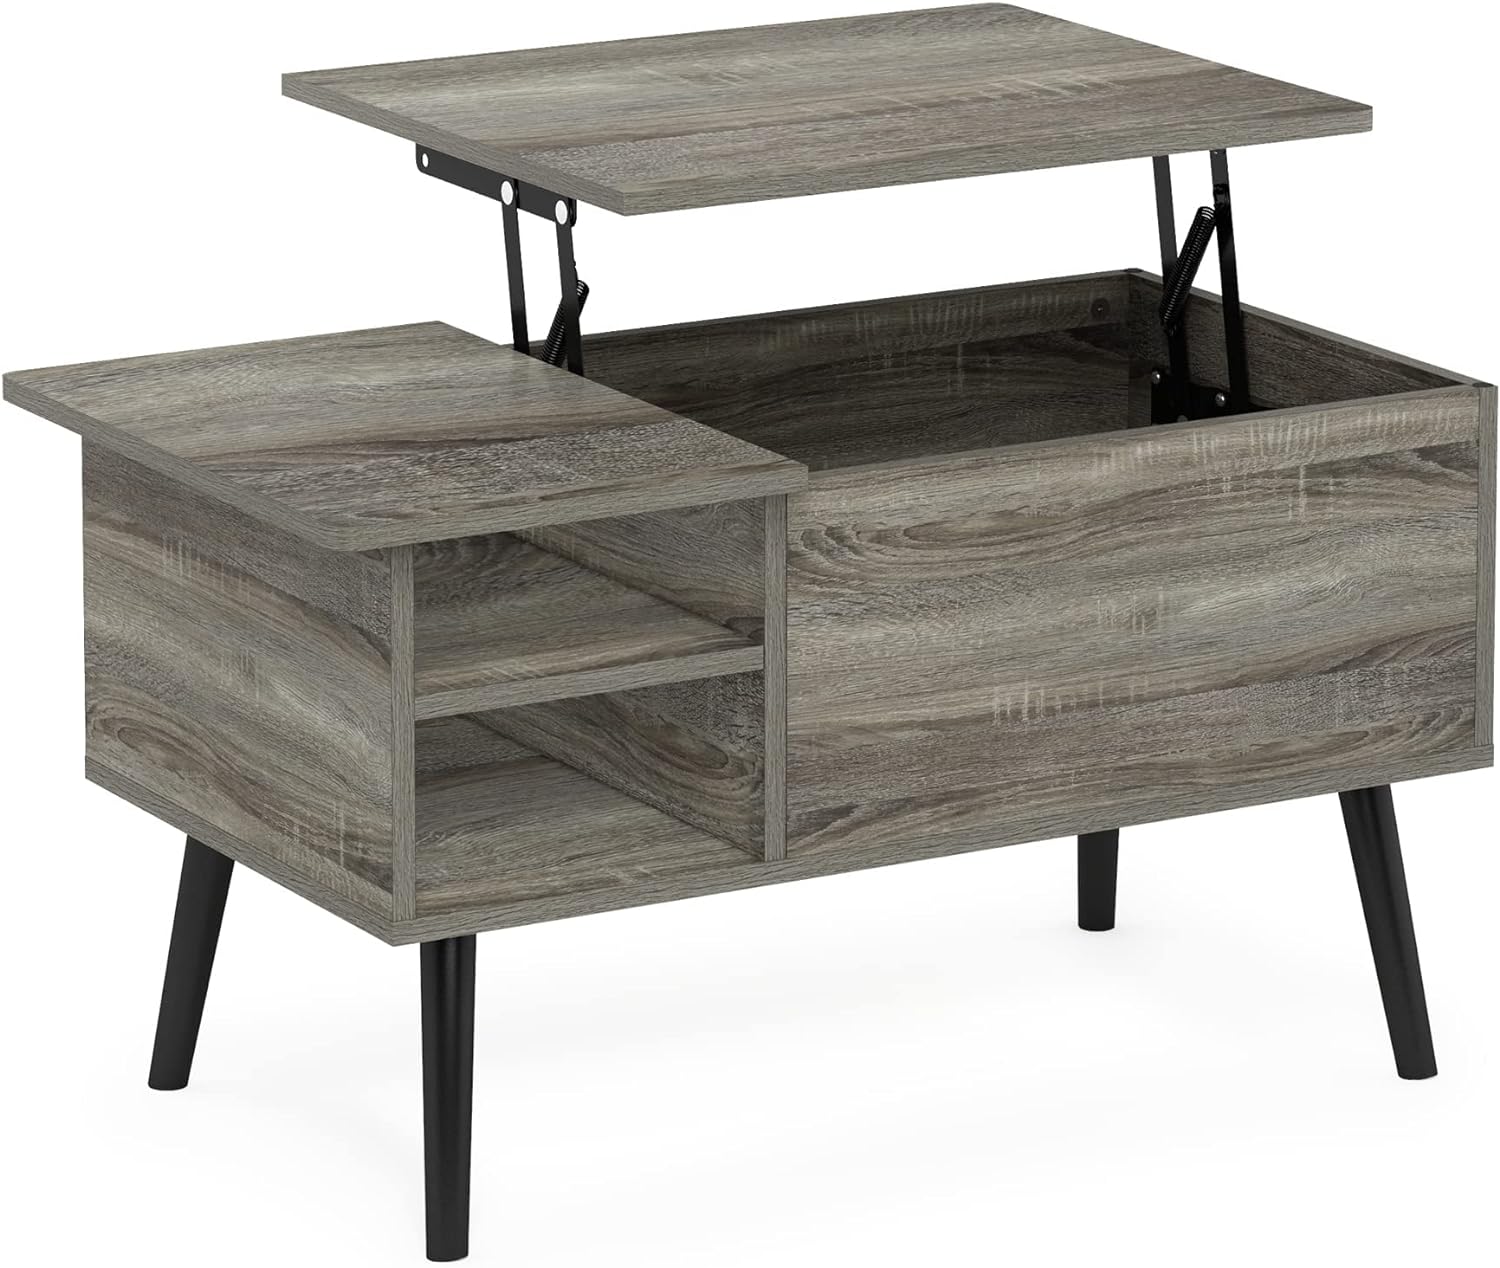 Furinno Jensen Living Room Wooden Leg Lift Top Coffee Table With Hidden Compartment and Side Open Storage Shelf, French Oak Grey